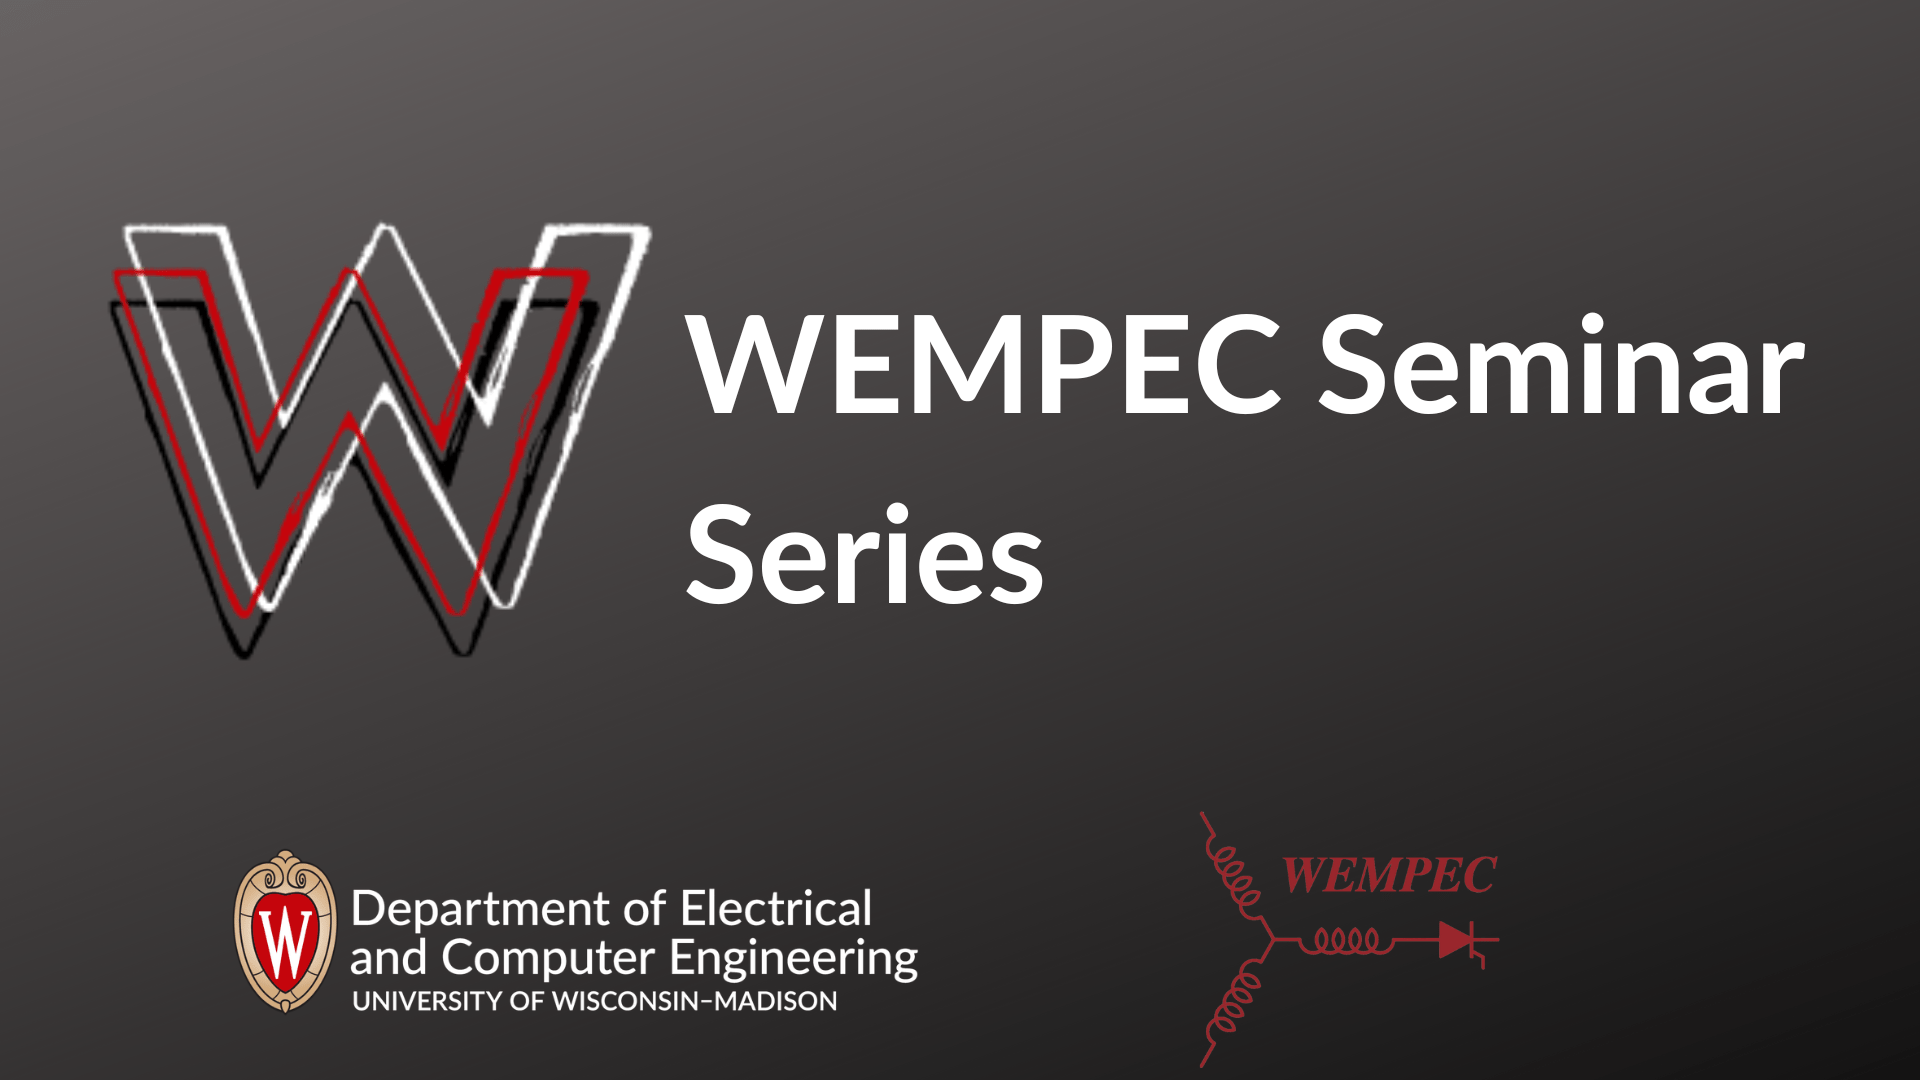 ECE Graphic - WEMPEC Seminar Series - Department of Electrical and Computer Engineering - WEMPEC